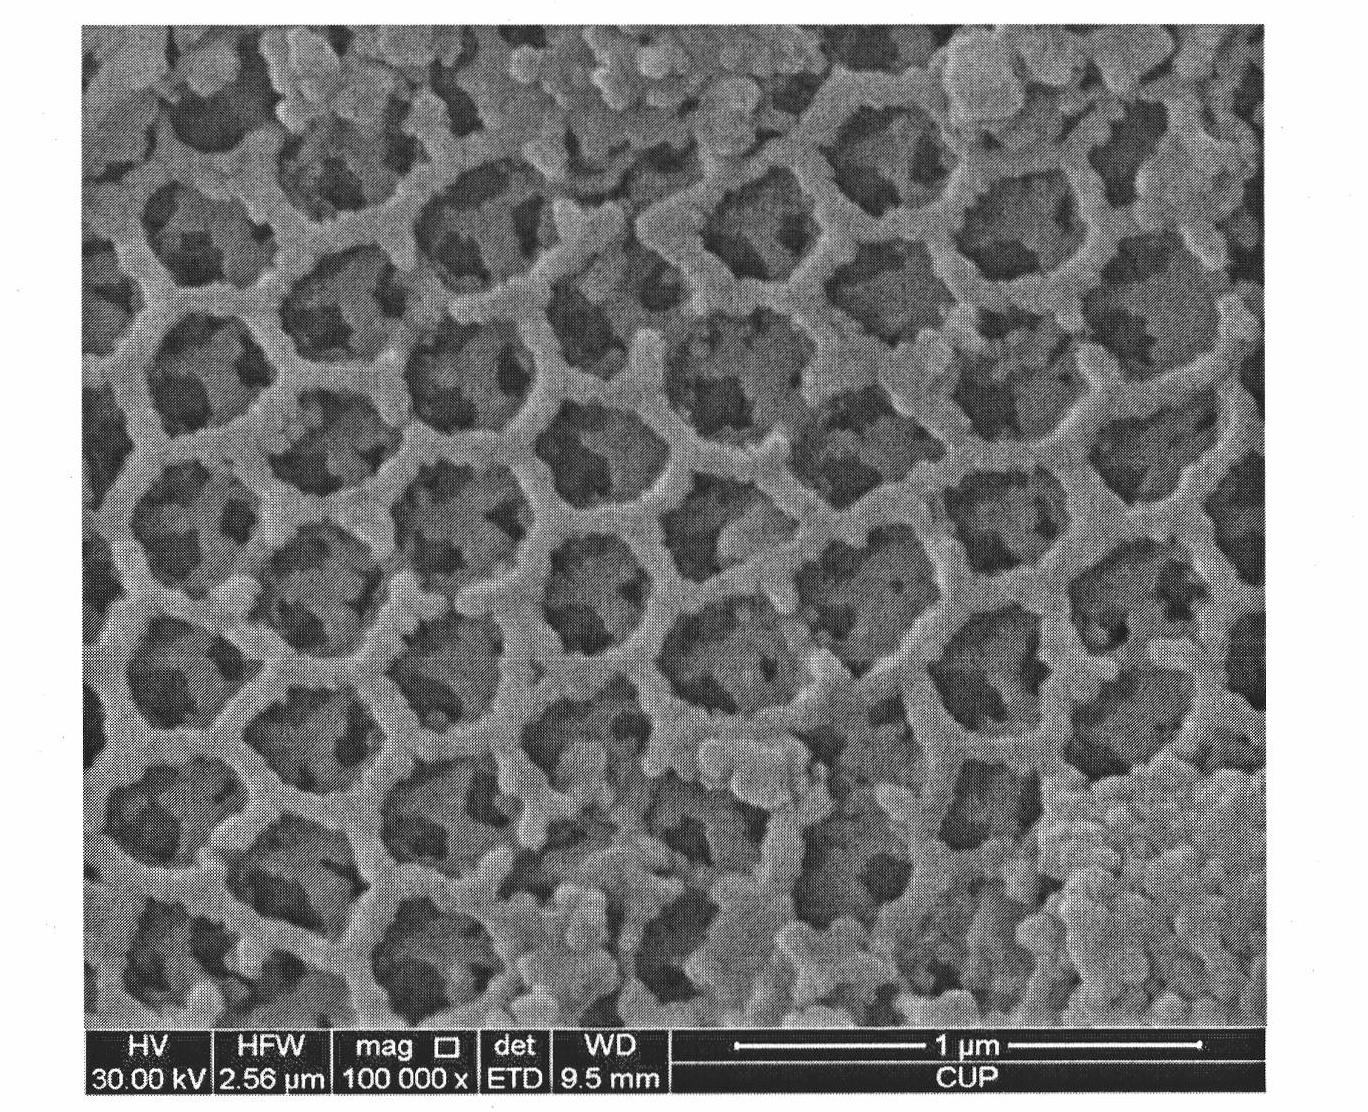 Catalyst of three-dimensional ordered macroporous cerium-based oxide supported gold for purifying diesel soot